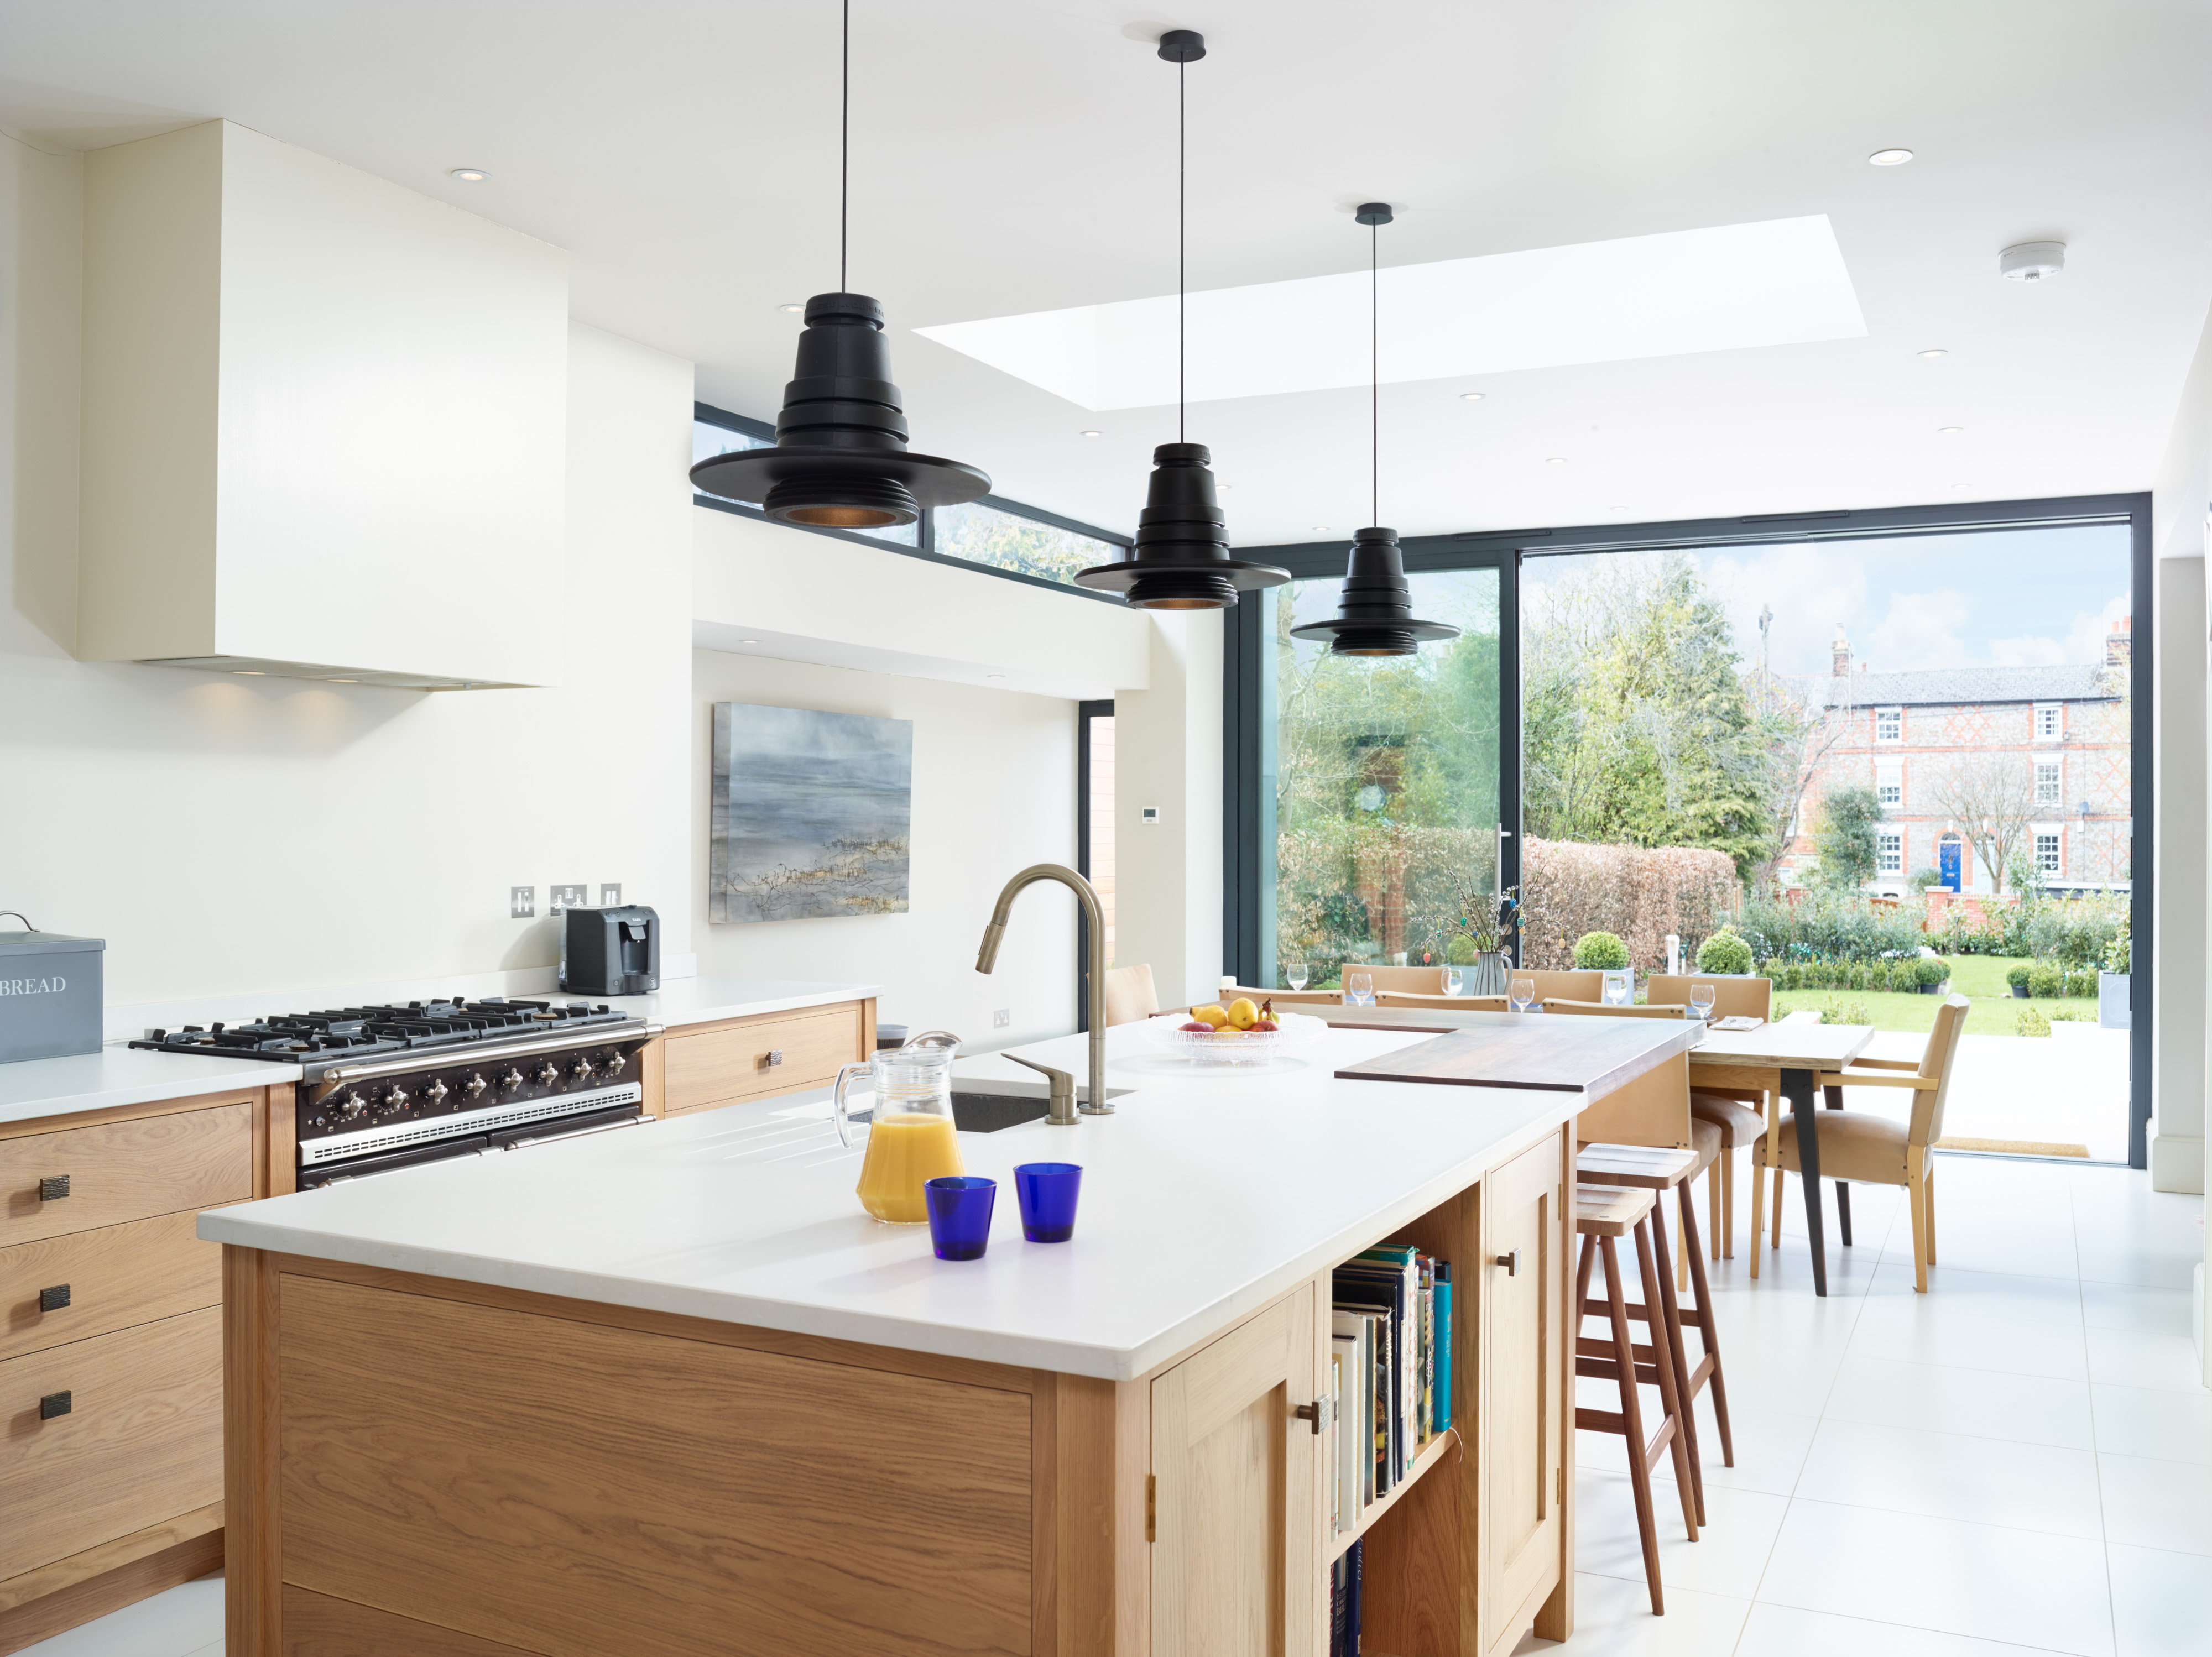 </p> <p>Find your ideal home design pro on designfor-me.com - get matched and see who's interested in your home project. Click image to see more inspiration from our design pros</p> <p>Design by Allister, architect from Vale of White Horse, South East</p> <p>#architecture #homedesign #modernhomes #homeinspiration #kitchens #kitchendesign #kitcheninspiration #kitchenideas #kitchengoals #skylights #rooflights </p> <p>